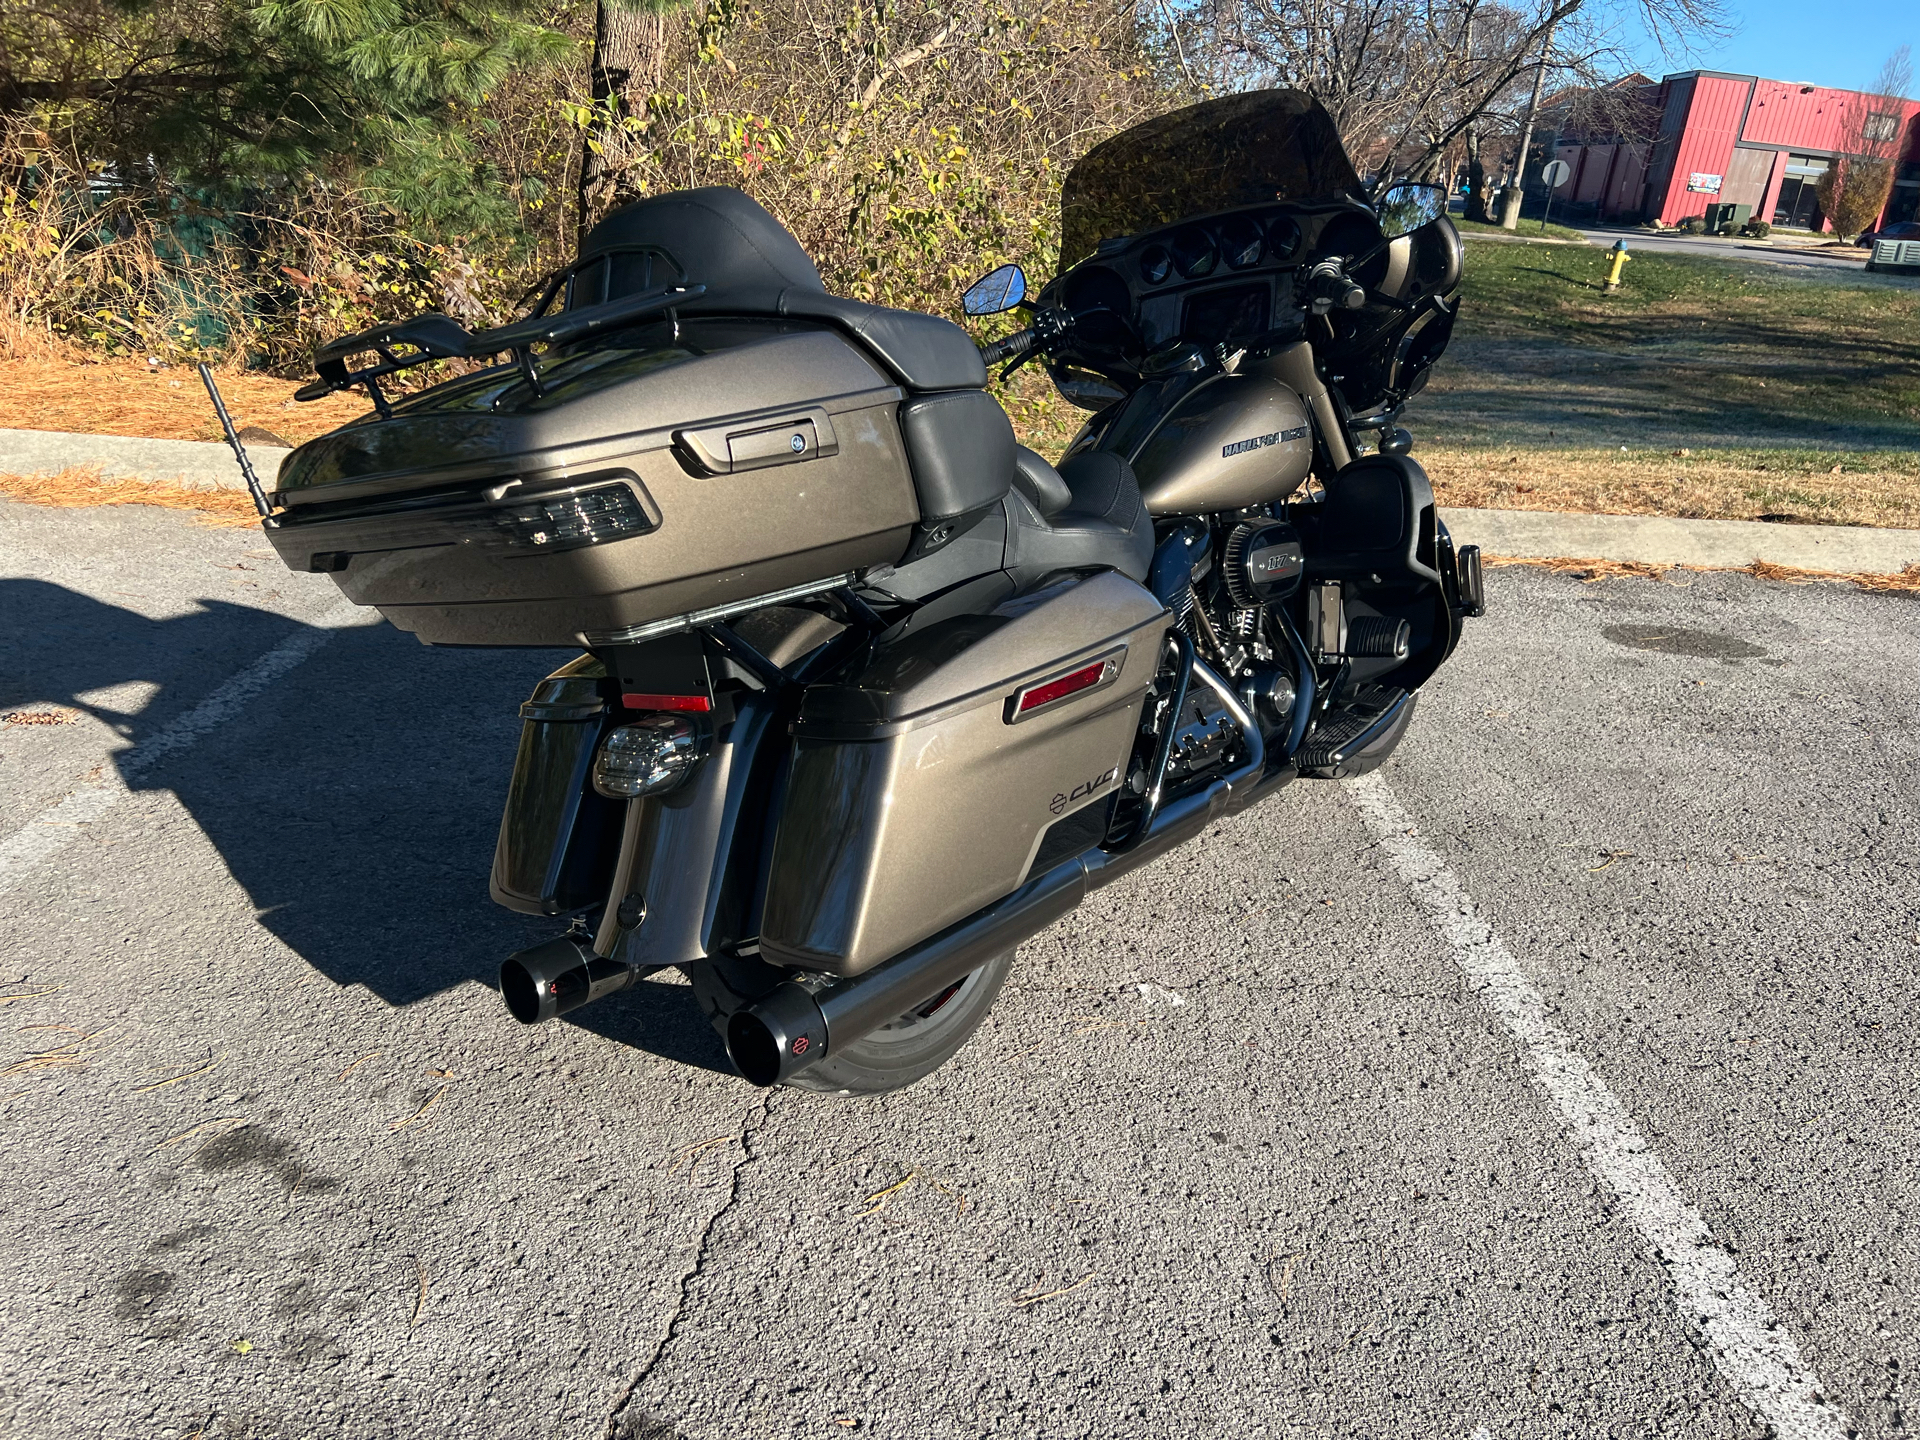 2021 Harley-Davidson CVO™ Limited in Franklin, Tennessee - Photo 9